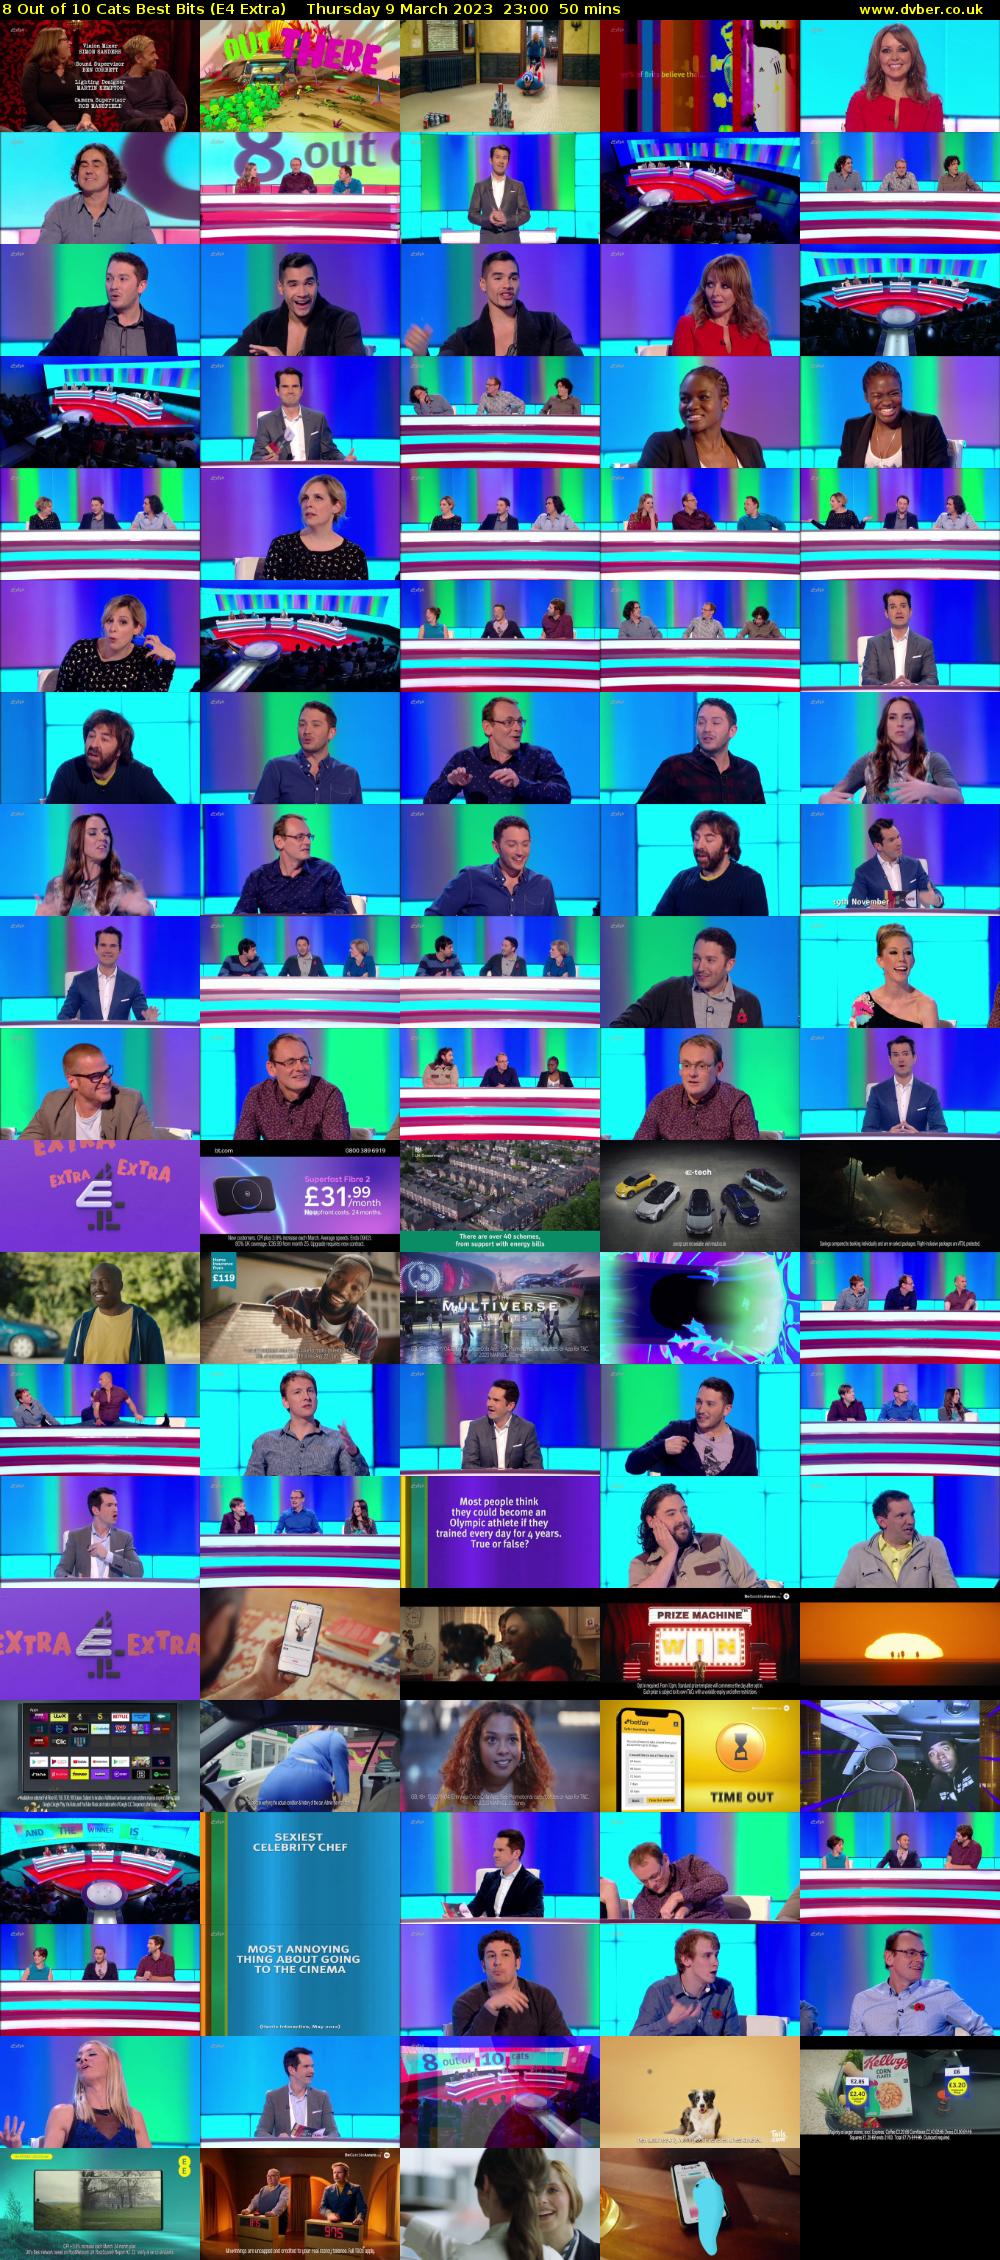 8 Out of 10 Cats Best Bits (E4 Extra) Thursday 9 March 2023 23:00 - 23:50